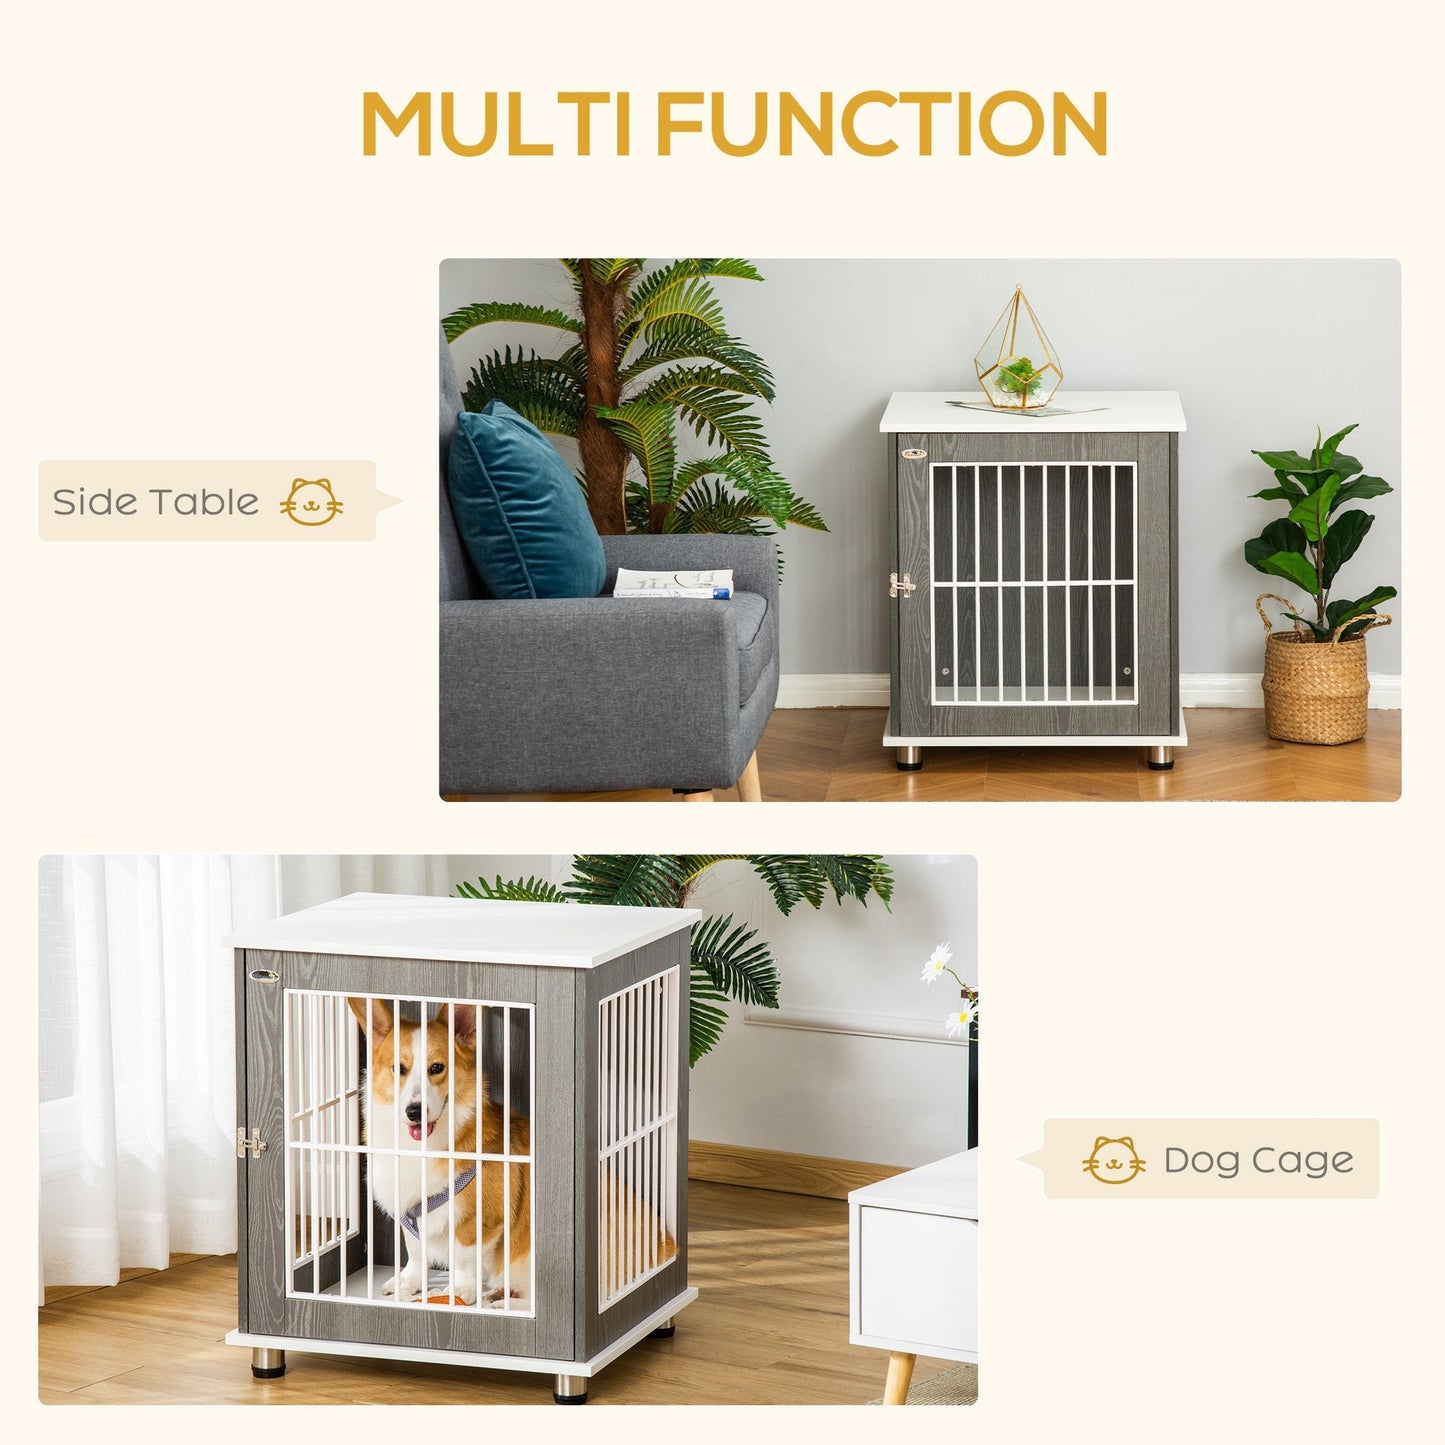 Pet Supplies-Dog Crate Pet Cage Kennel End Table Furniture Style, Indoor Dog kennel with Wooden Top & Adjustable Feet for Small Dogs, Gray - Outdoor Style Company